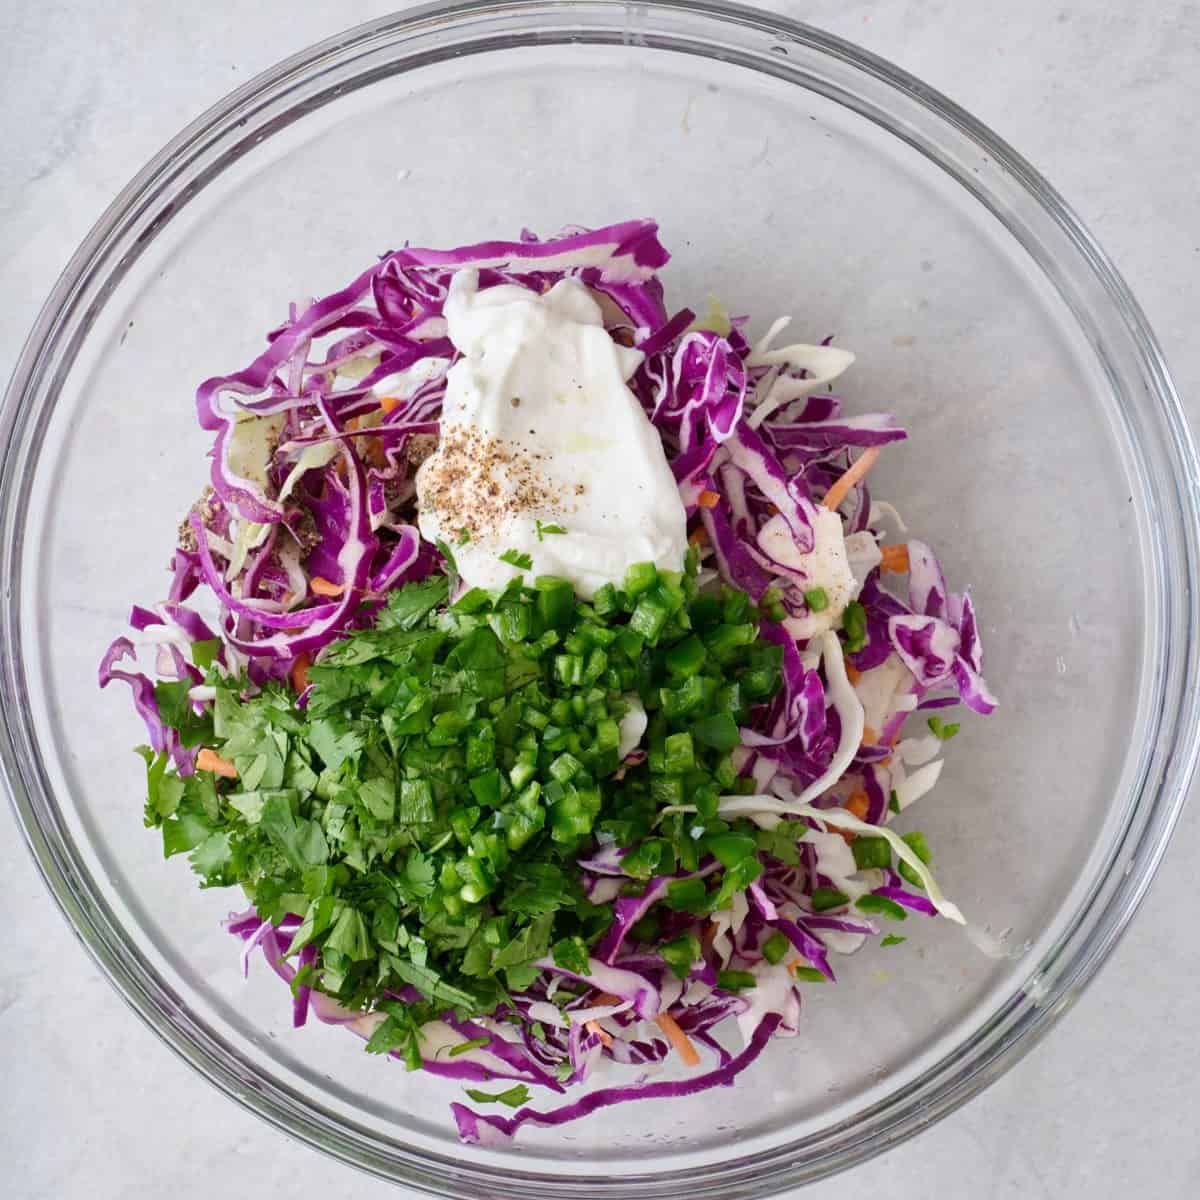 Ingredients for slaw in a bowl.